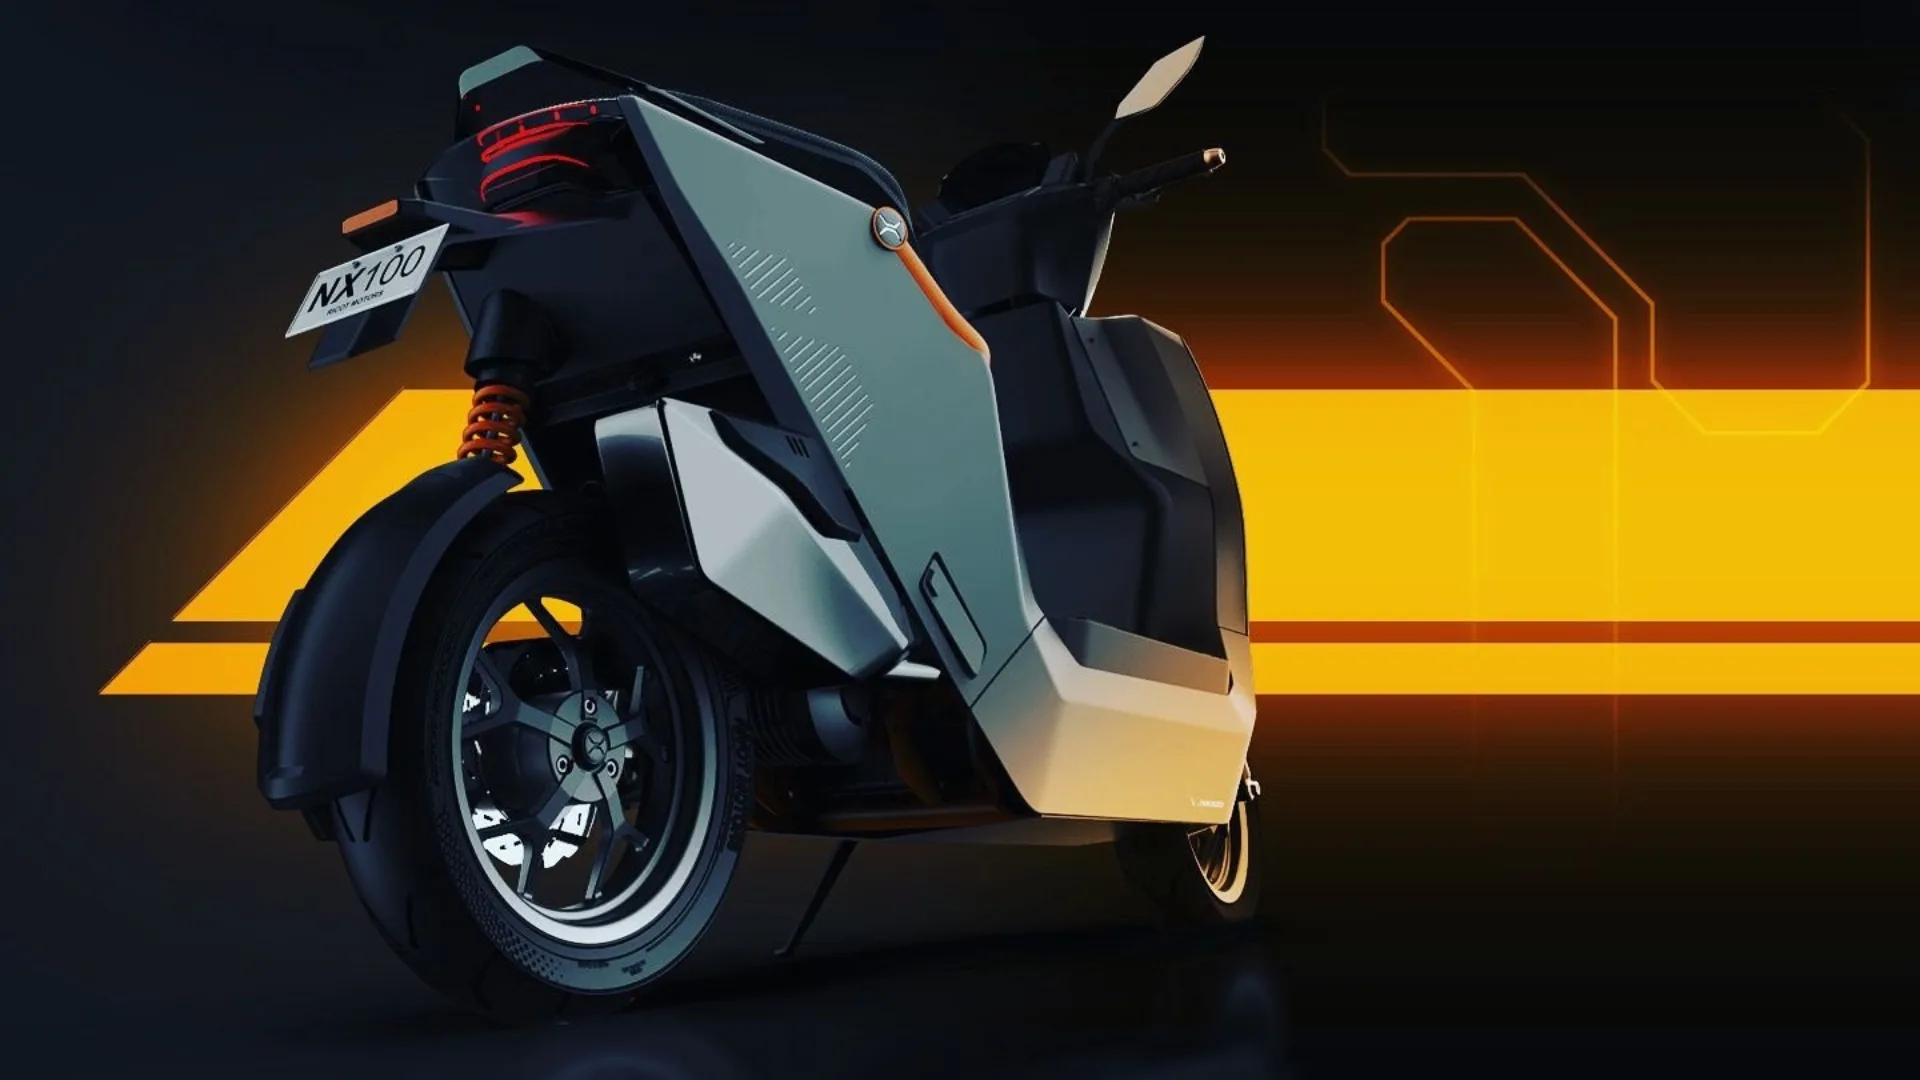 Rivot NX100: Affordable, locally made, and can go 545 km on a single charge. The future of eco-friendly urban commuting